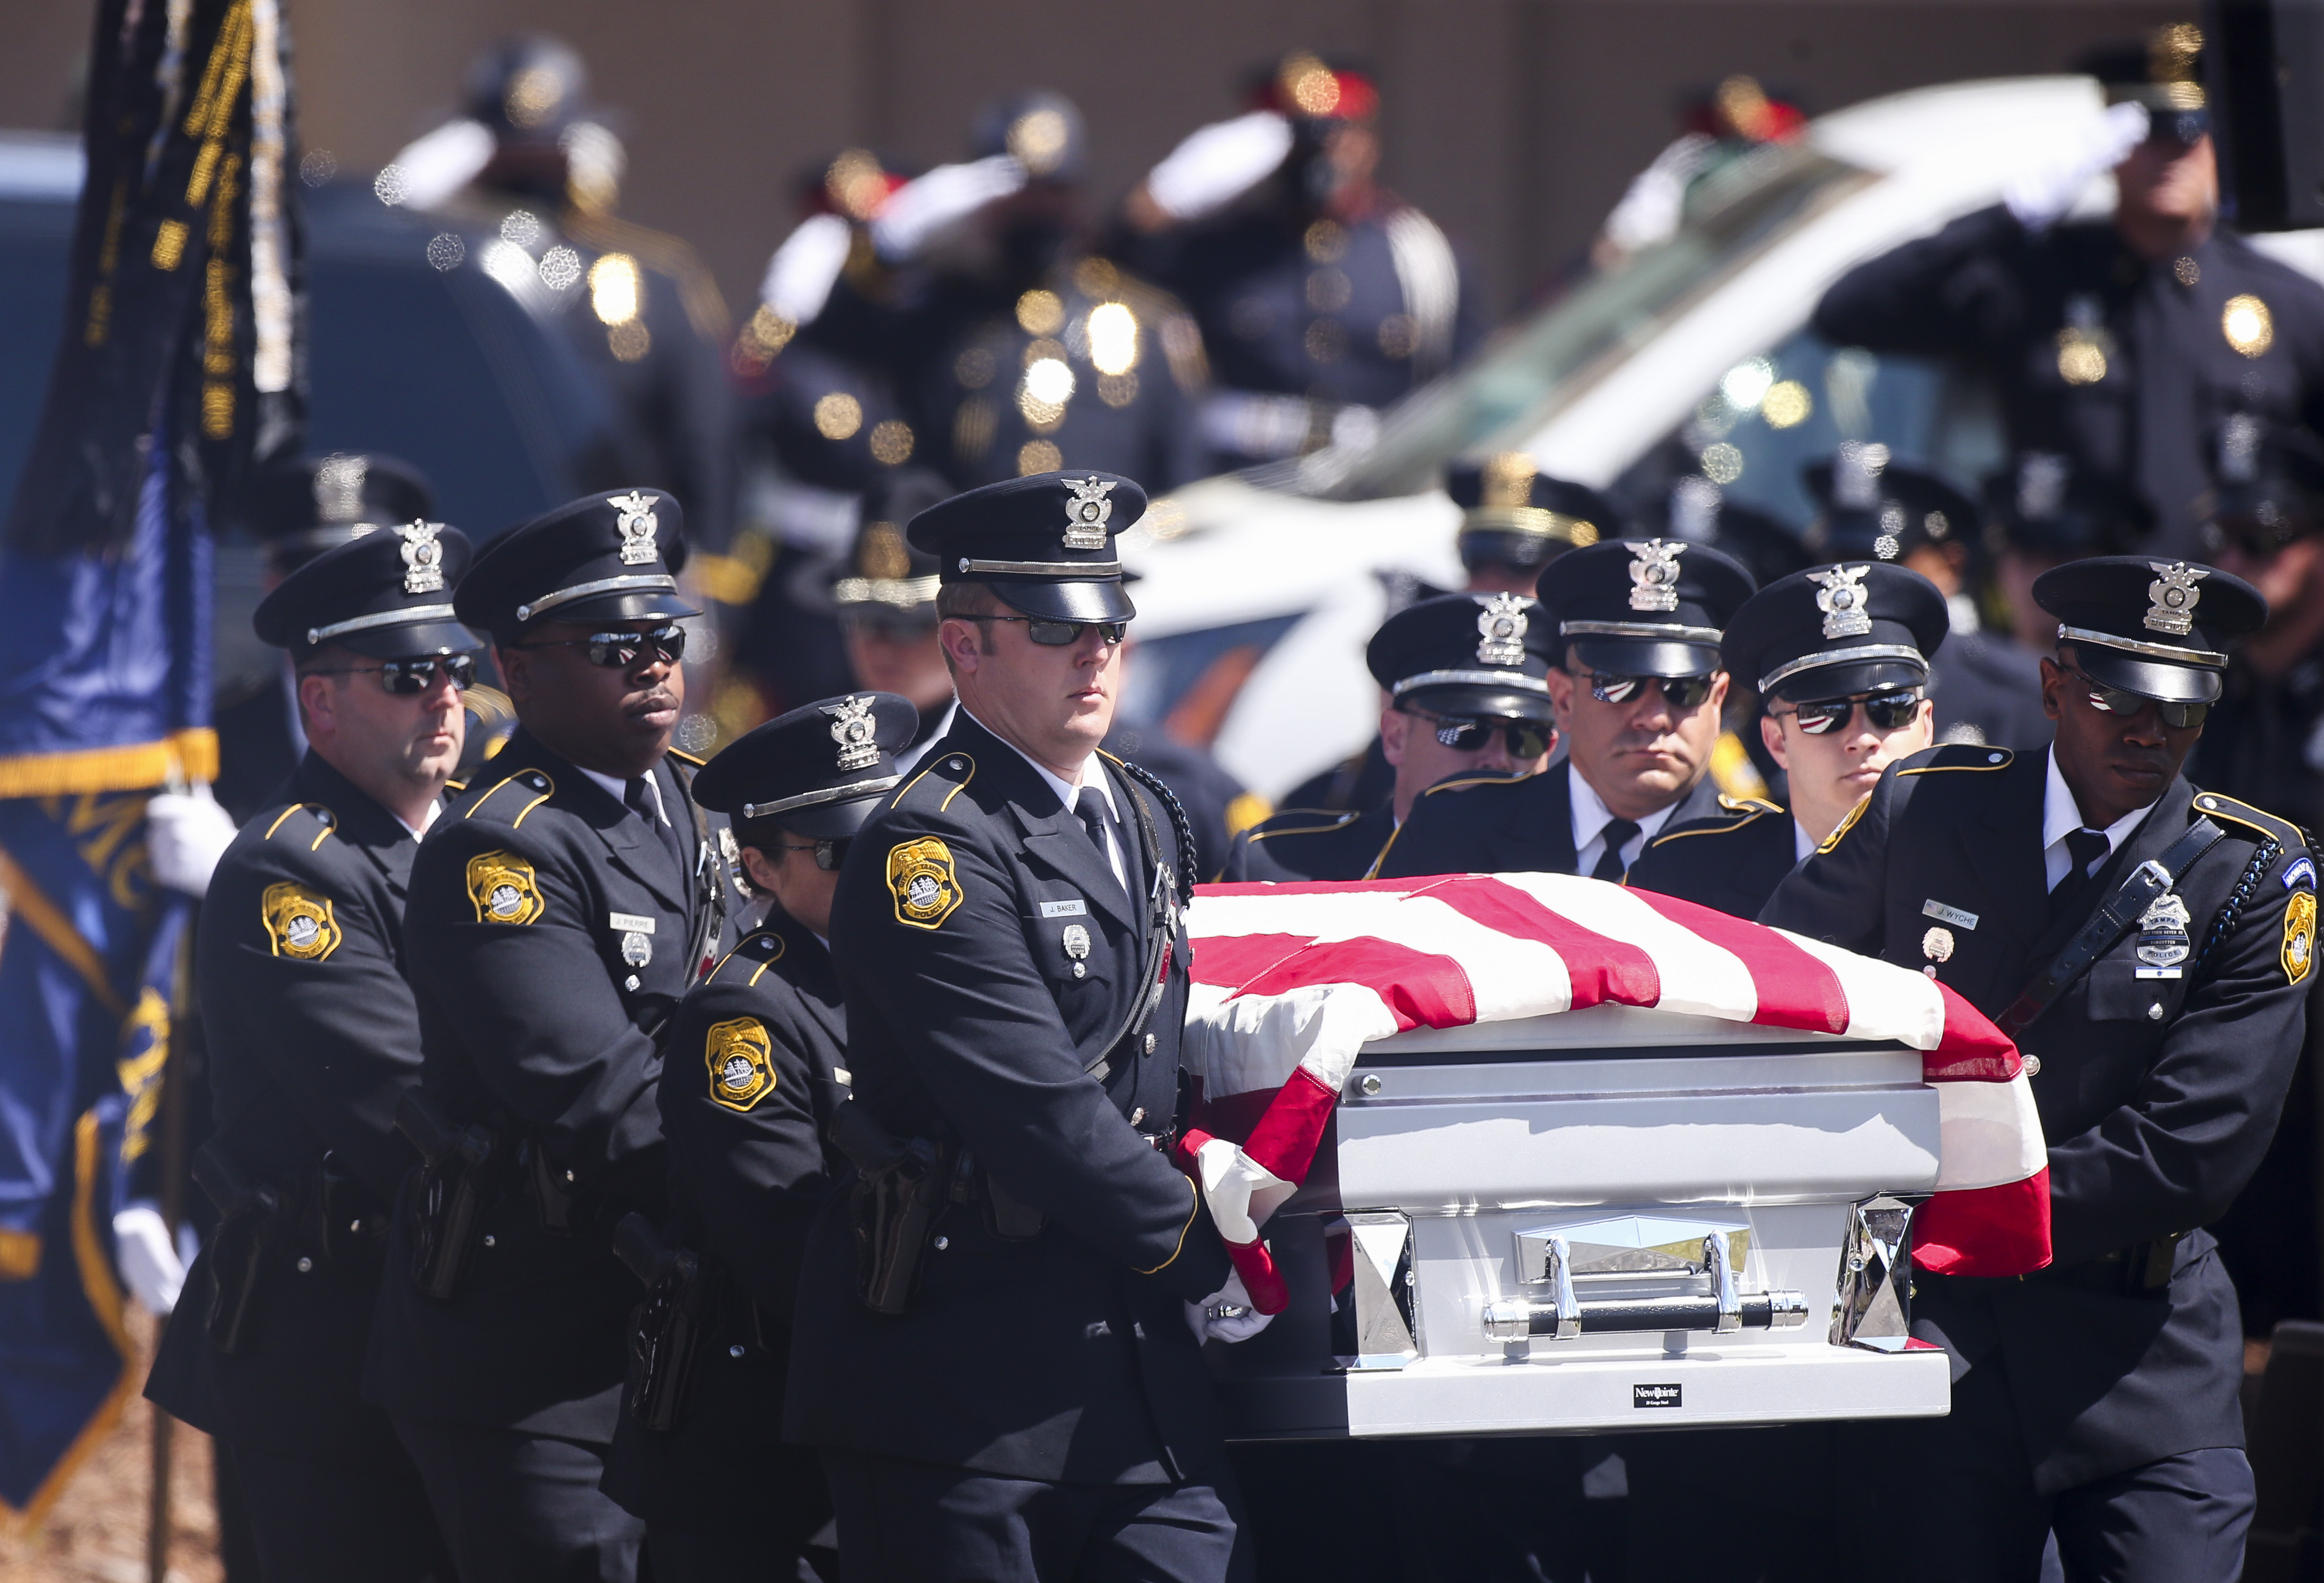 Photos: Funeral services for Tampa Master Patrol Officer Jesse Madsen